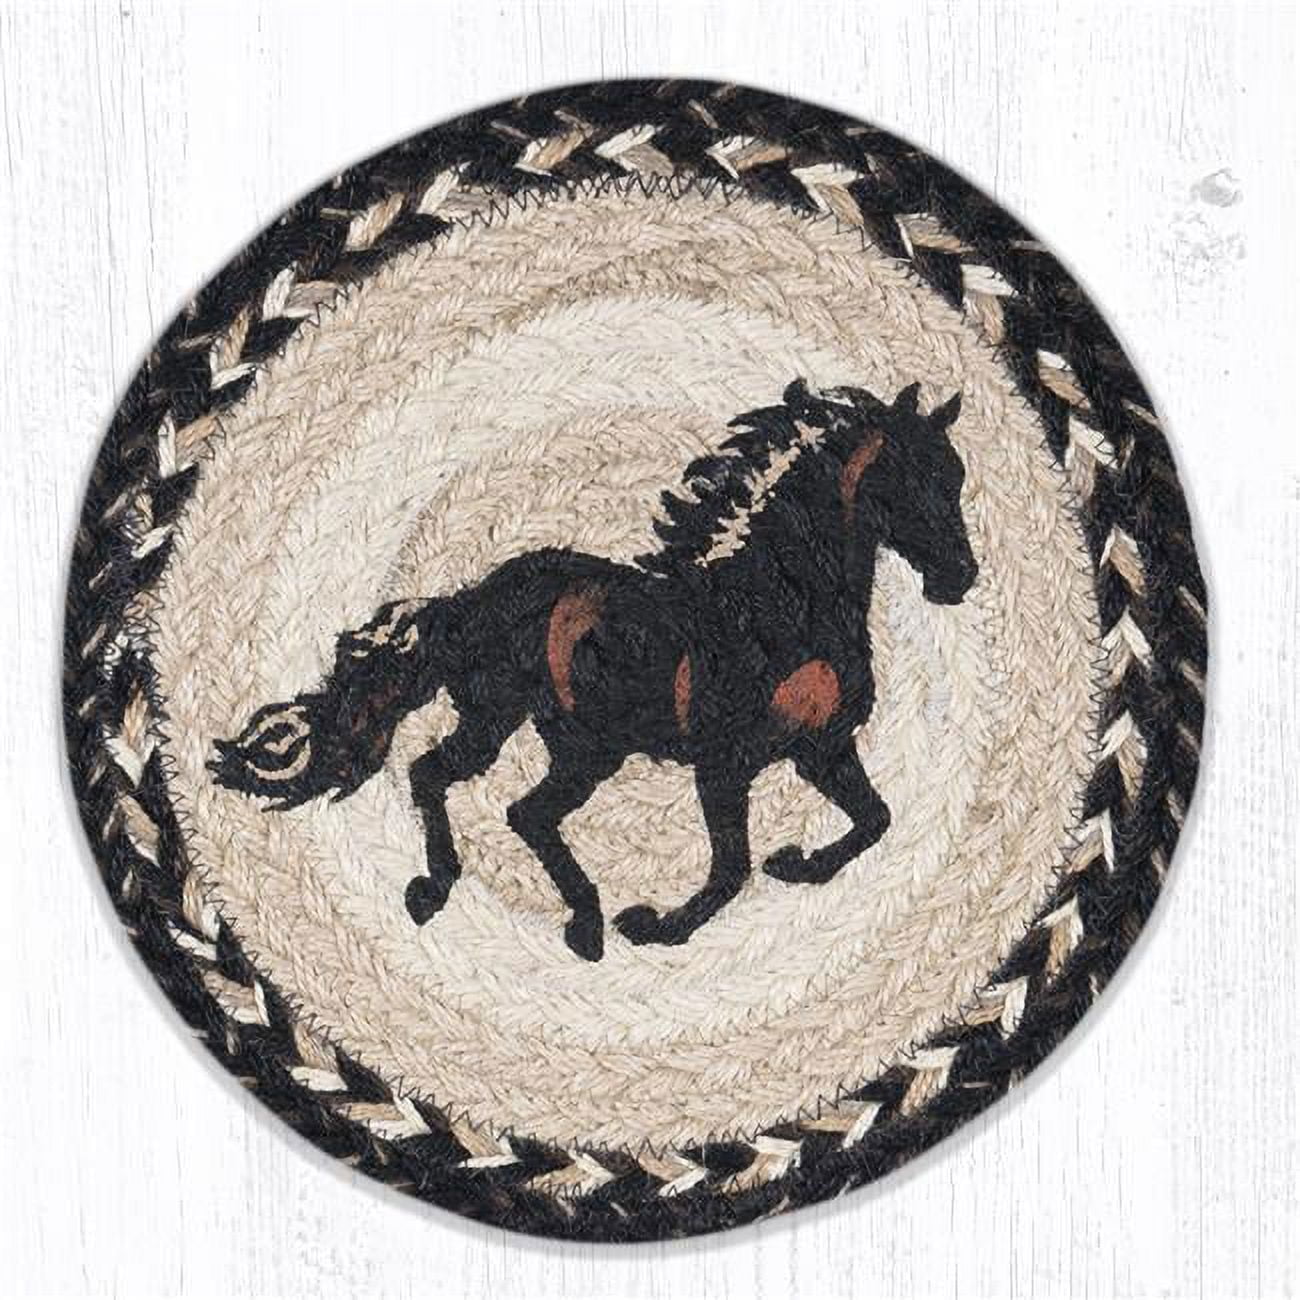 Capitol Importing 80-9-093s 10 X 10 In. Mspr-9-93 Stallion Printed Round Trivet